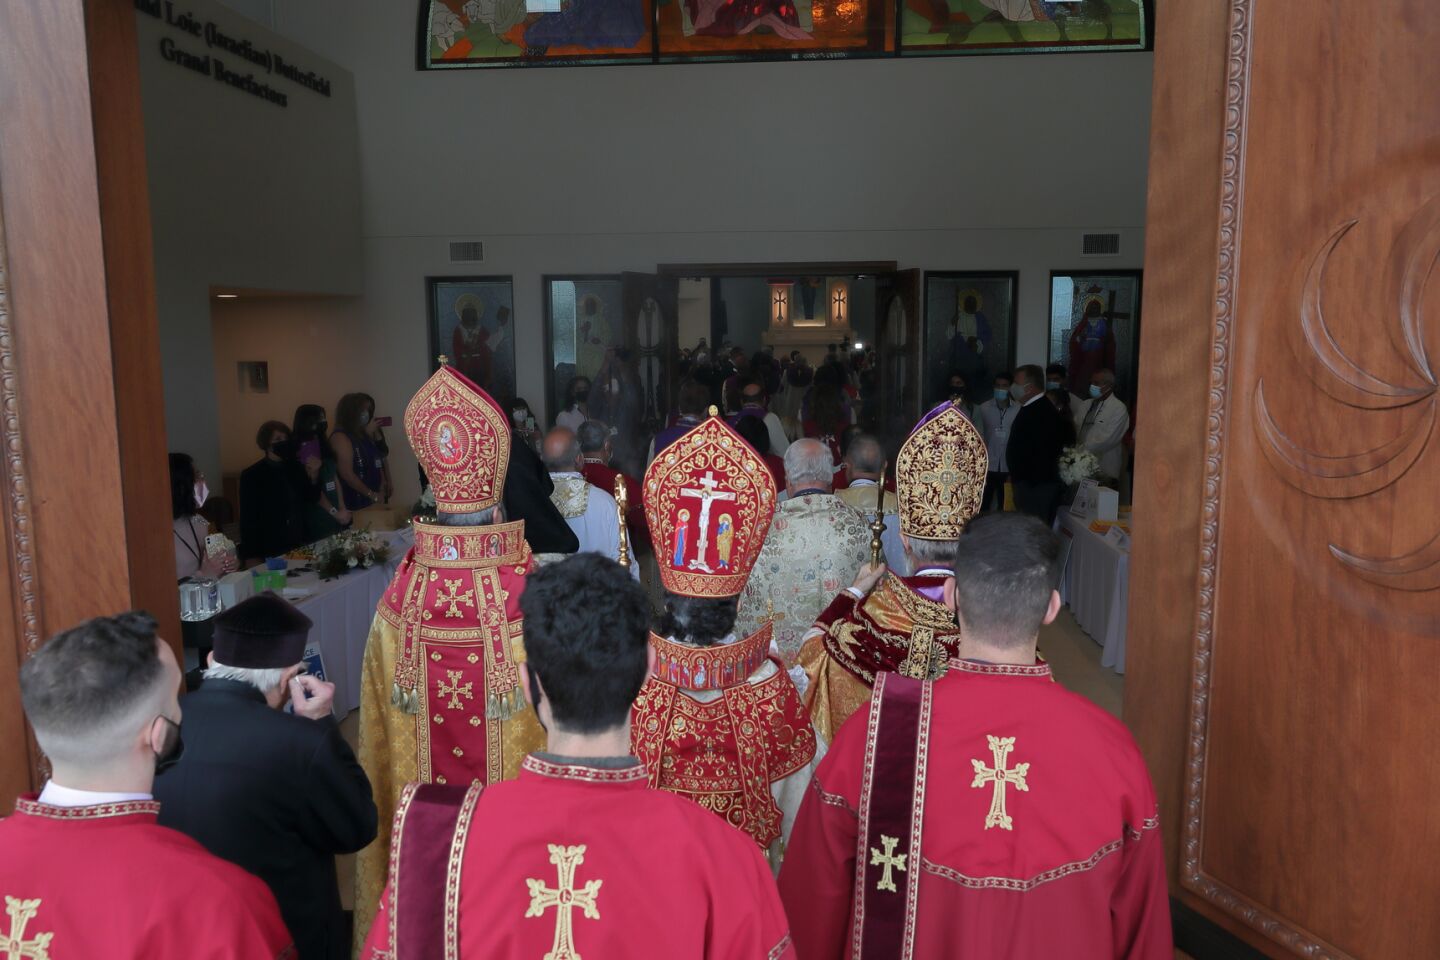 The processional for the consecration and church naming ceremony at the new Armenian Church in San Diego